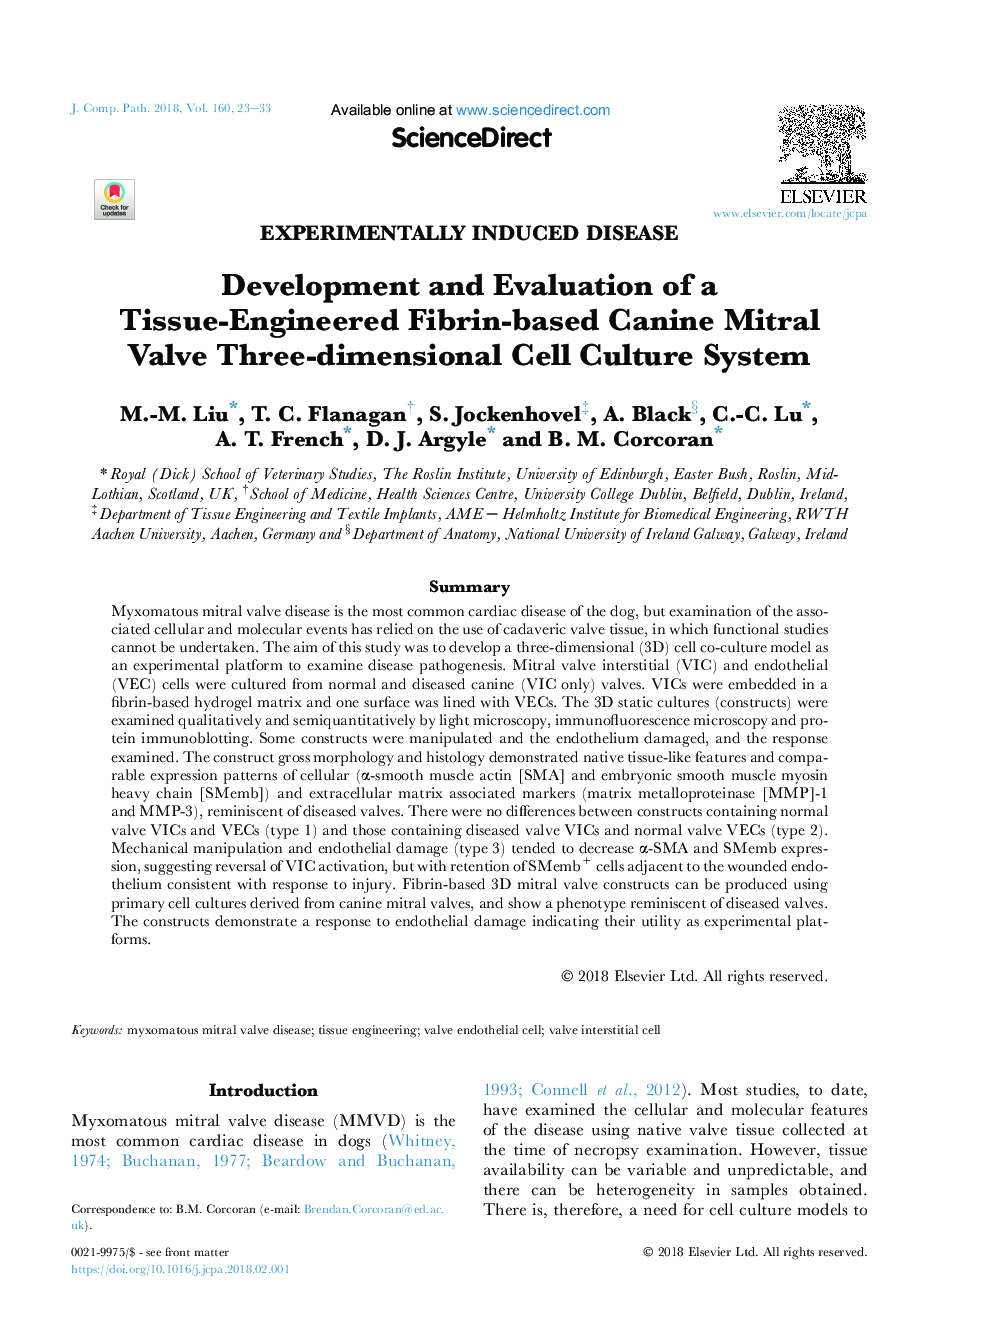 Development and Evaluation of a Tissue-Engineered Fibrin-based Canine Mitral Valve Three-dimensional Cell Culture System